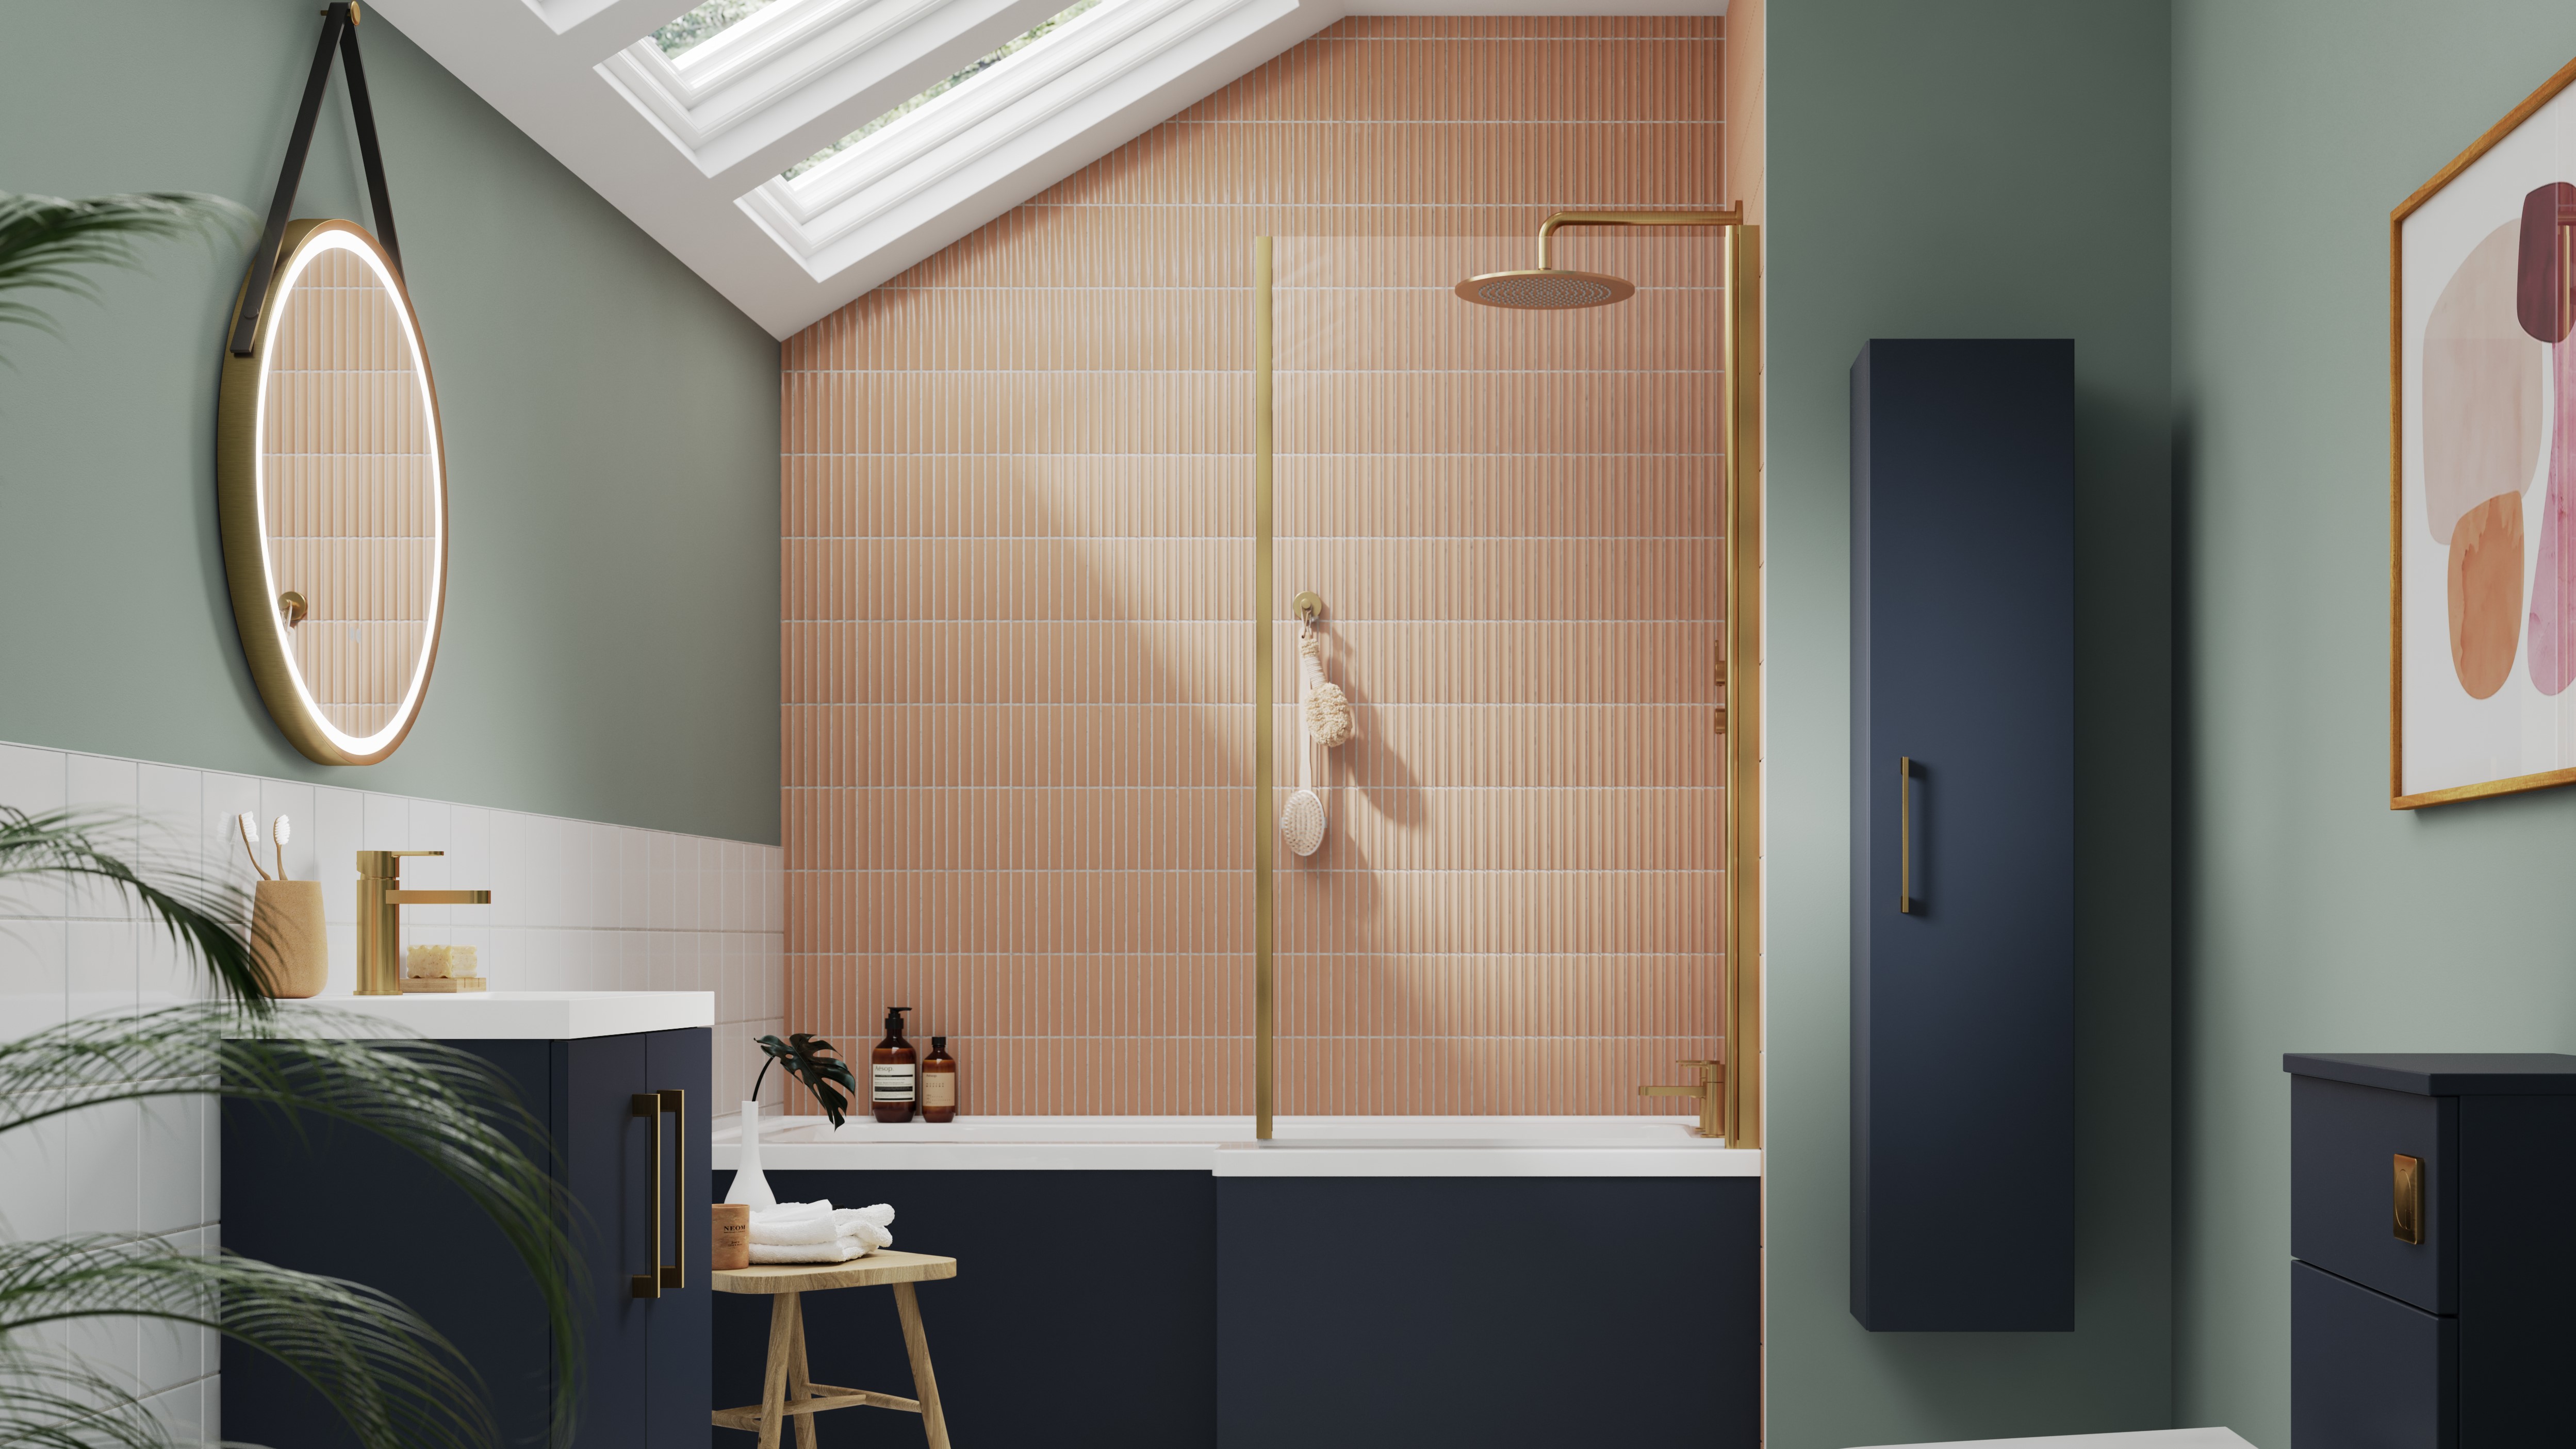 Bath Screens - The complete buying guide